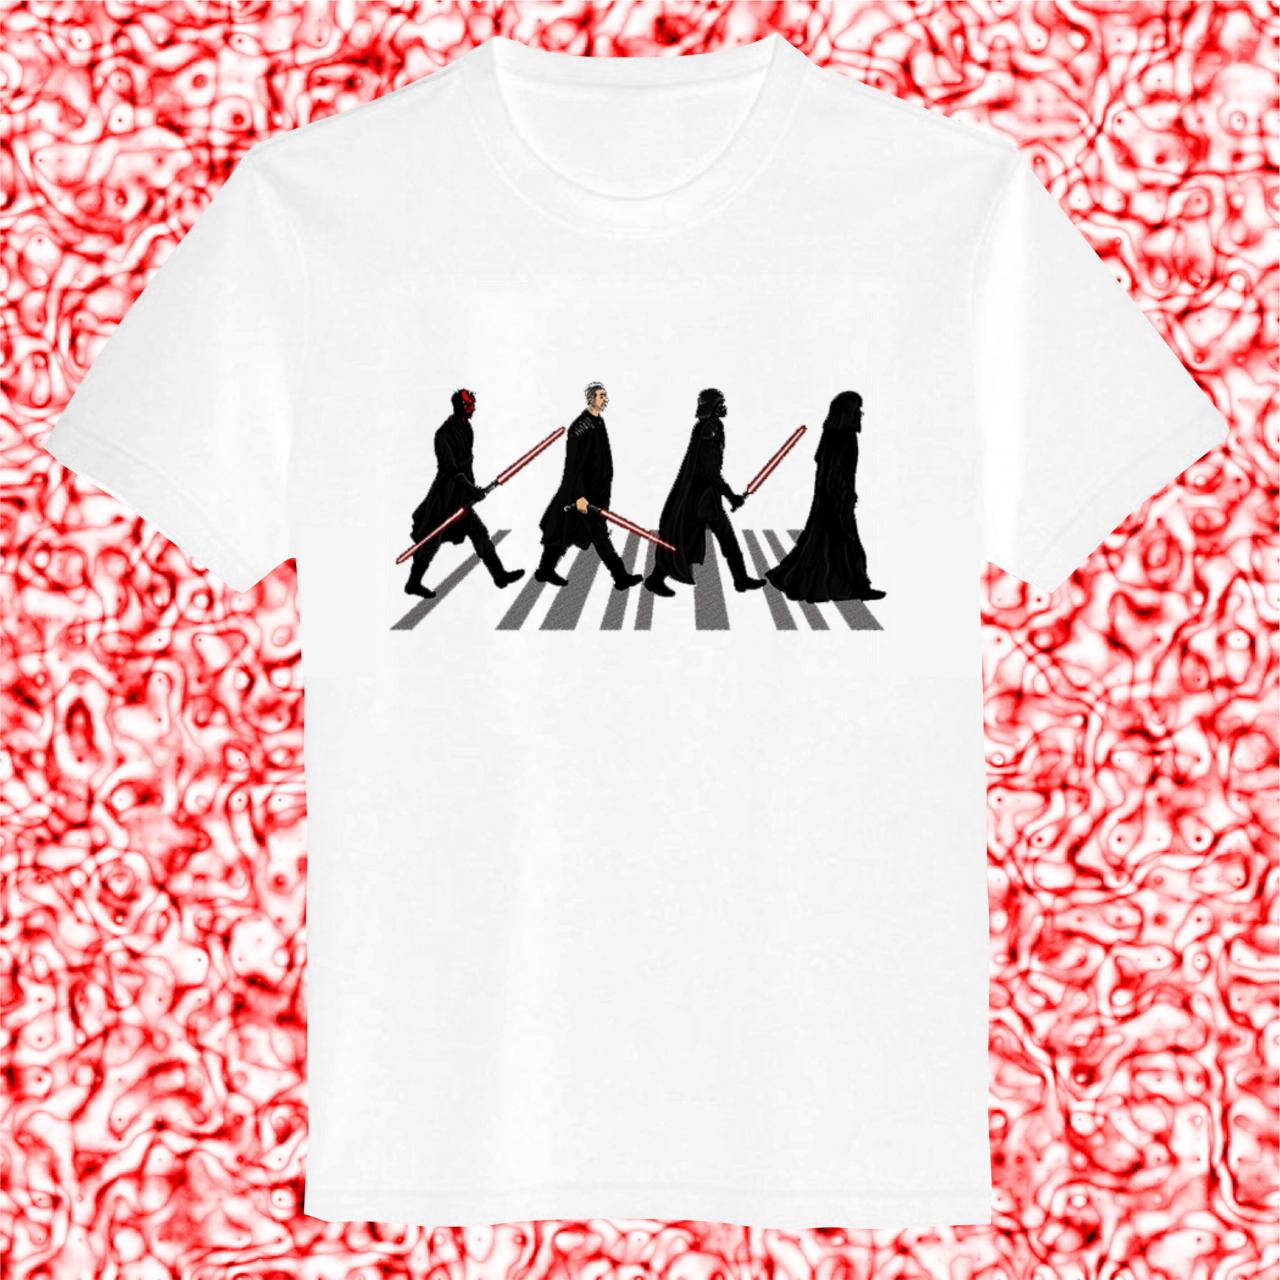 Abbey Road T-shirt Mens And Womens Cotton Screenprint Size S - 3xl